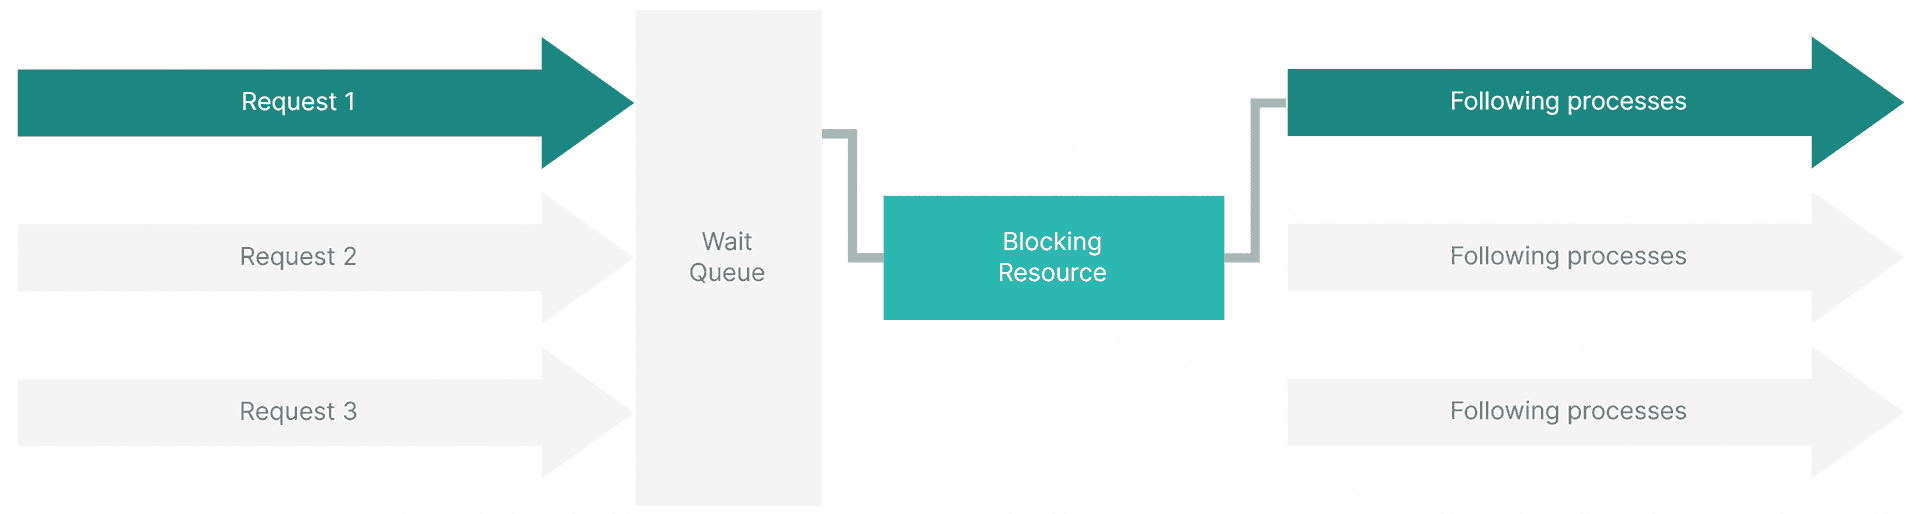 Fig. 2. Only the first request can access a Blocking Resource. Other requests are in the wait queue, while Following Processes have the capacity to serve more requests.